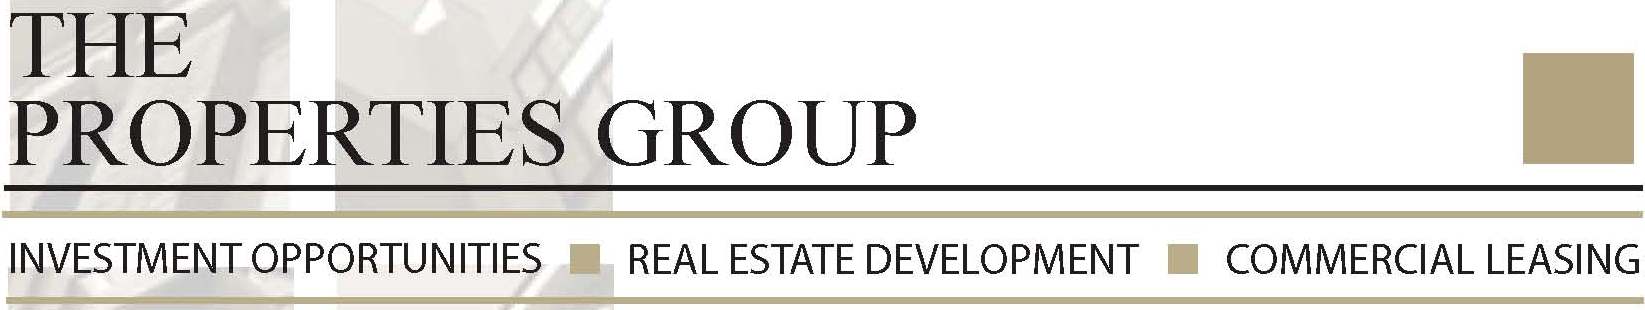 The properties group